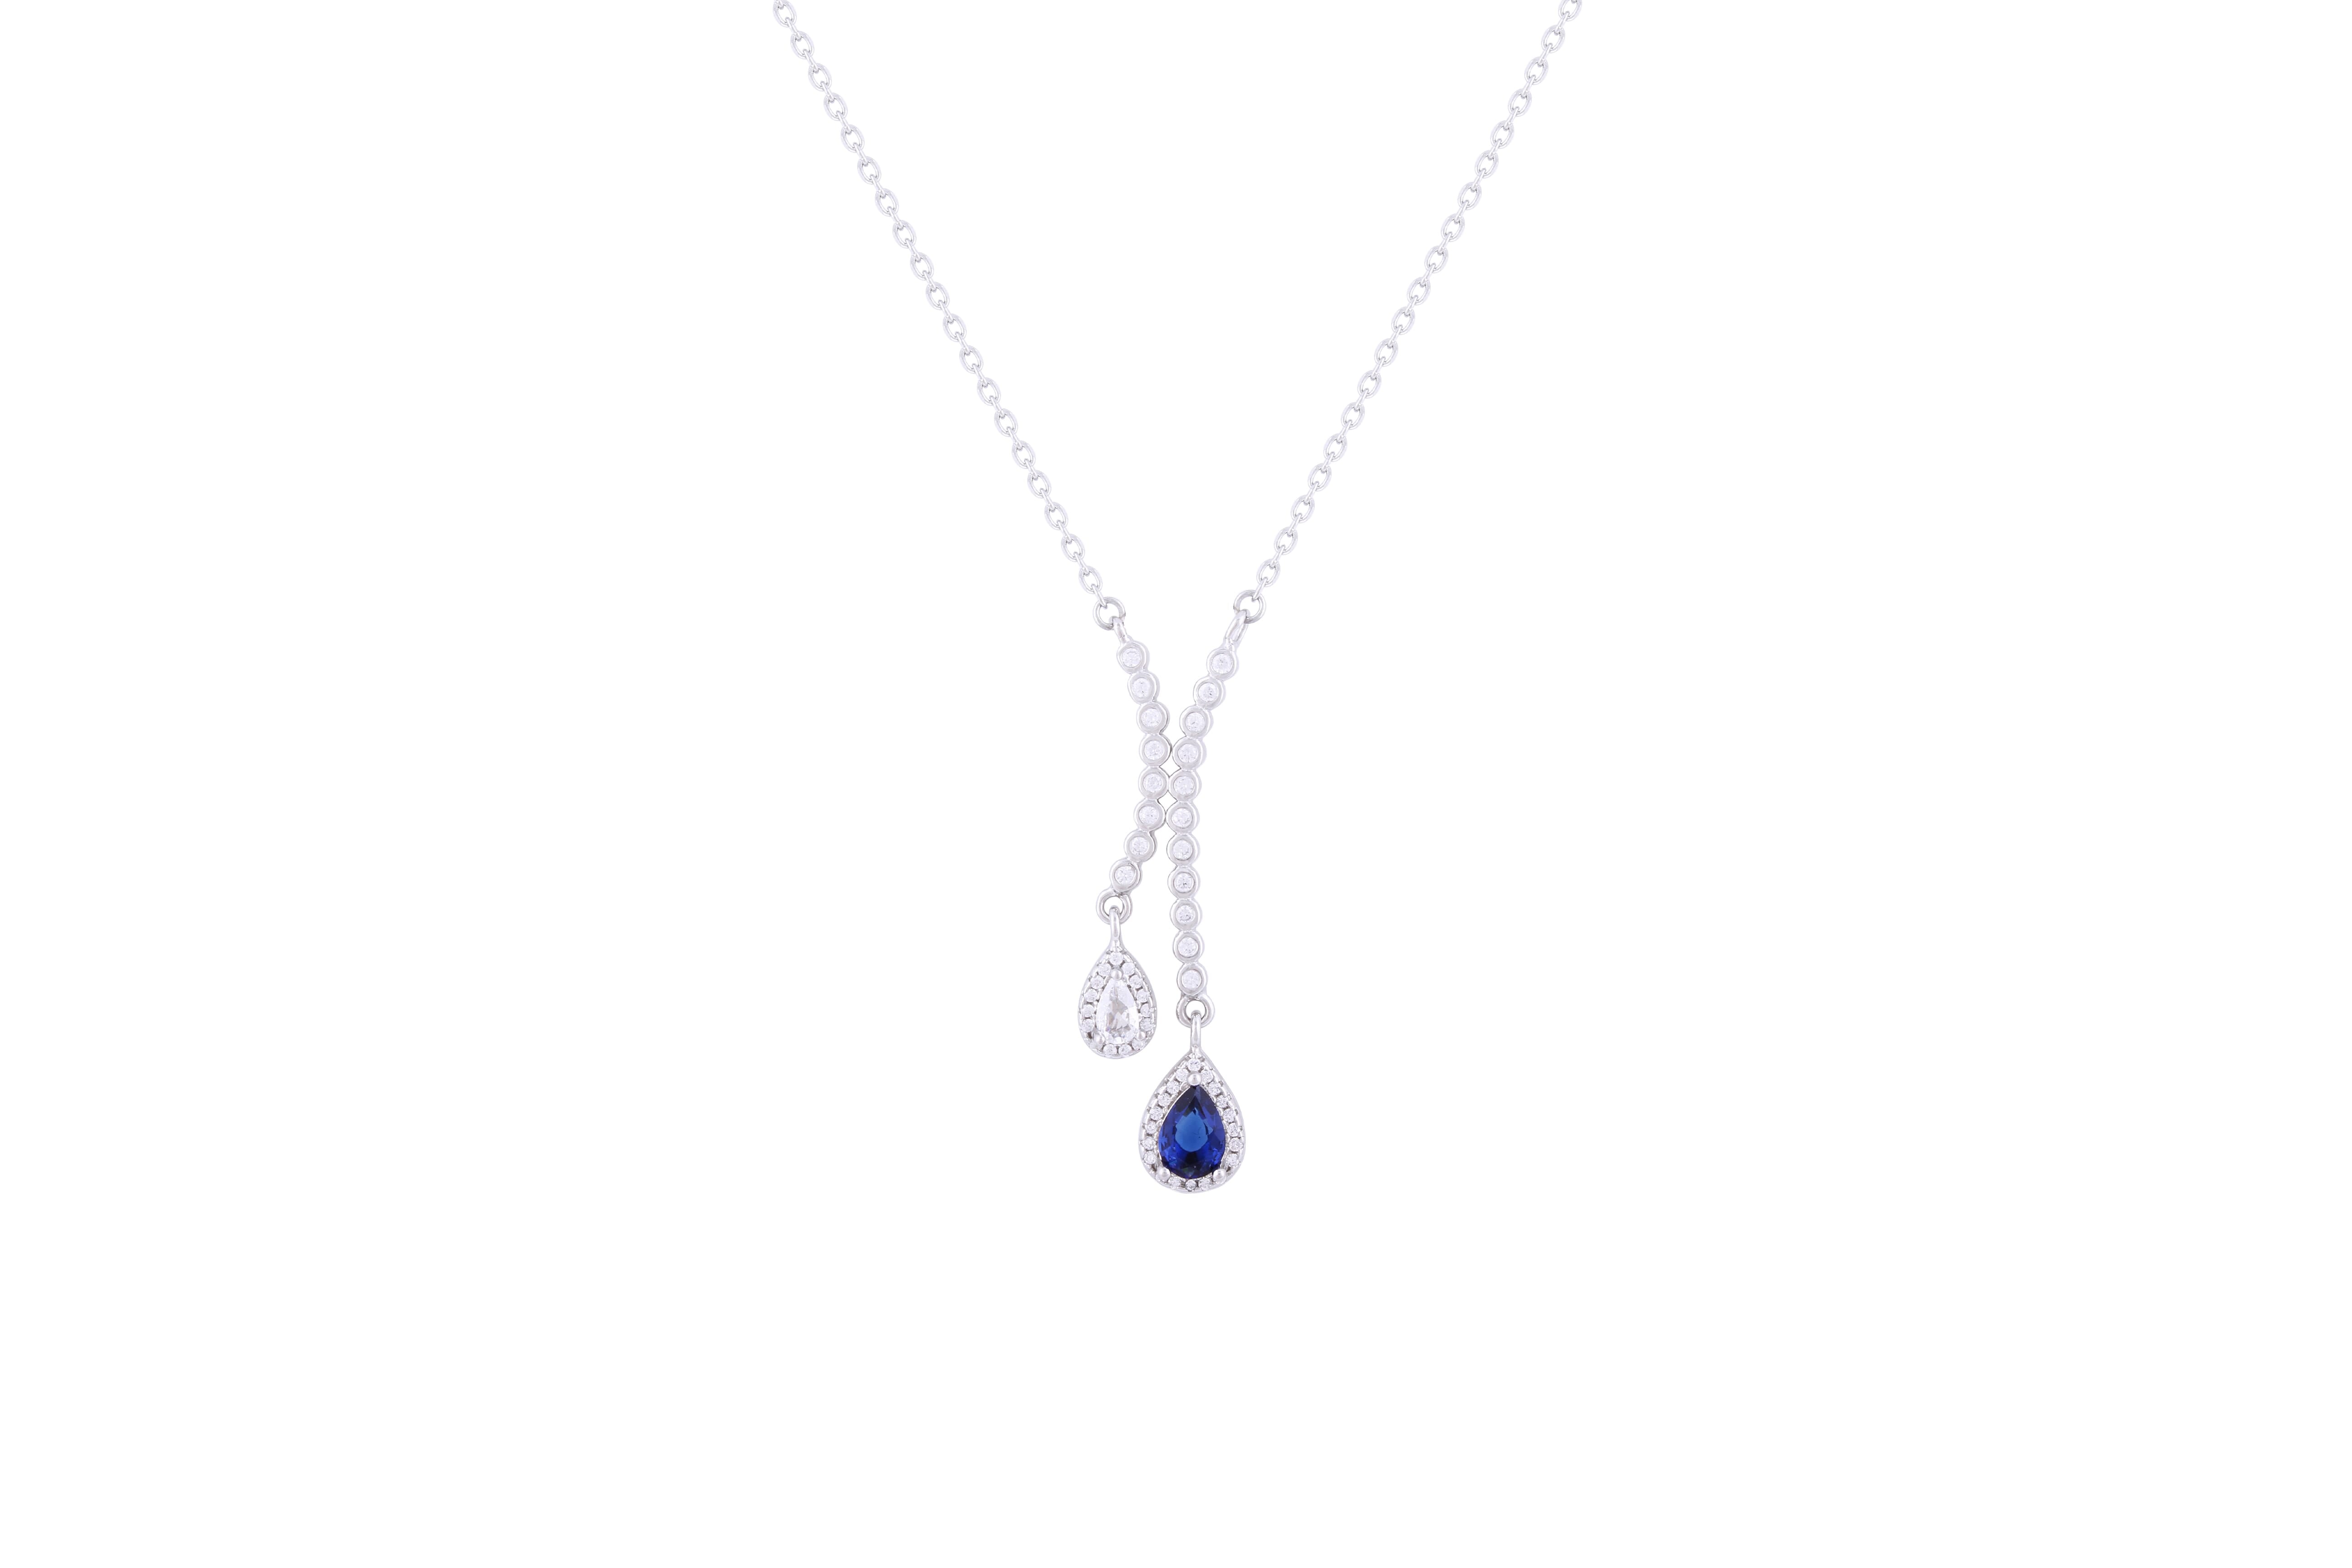 Asfour 925 Sterling Silver Necklace Inlaid With Blue Pear Stone NR0497-WB